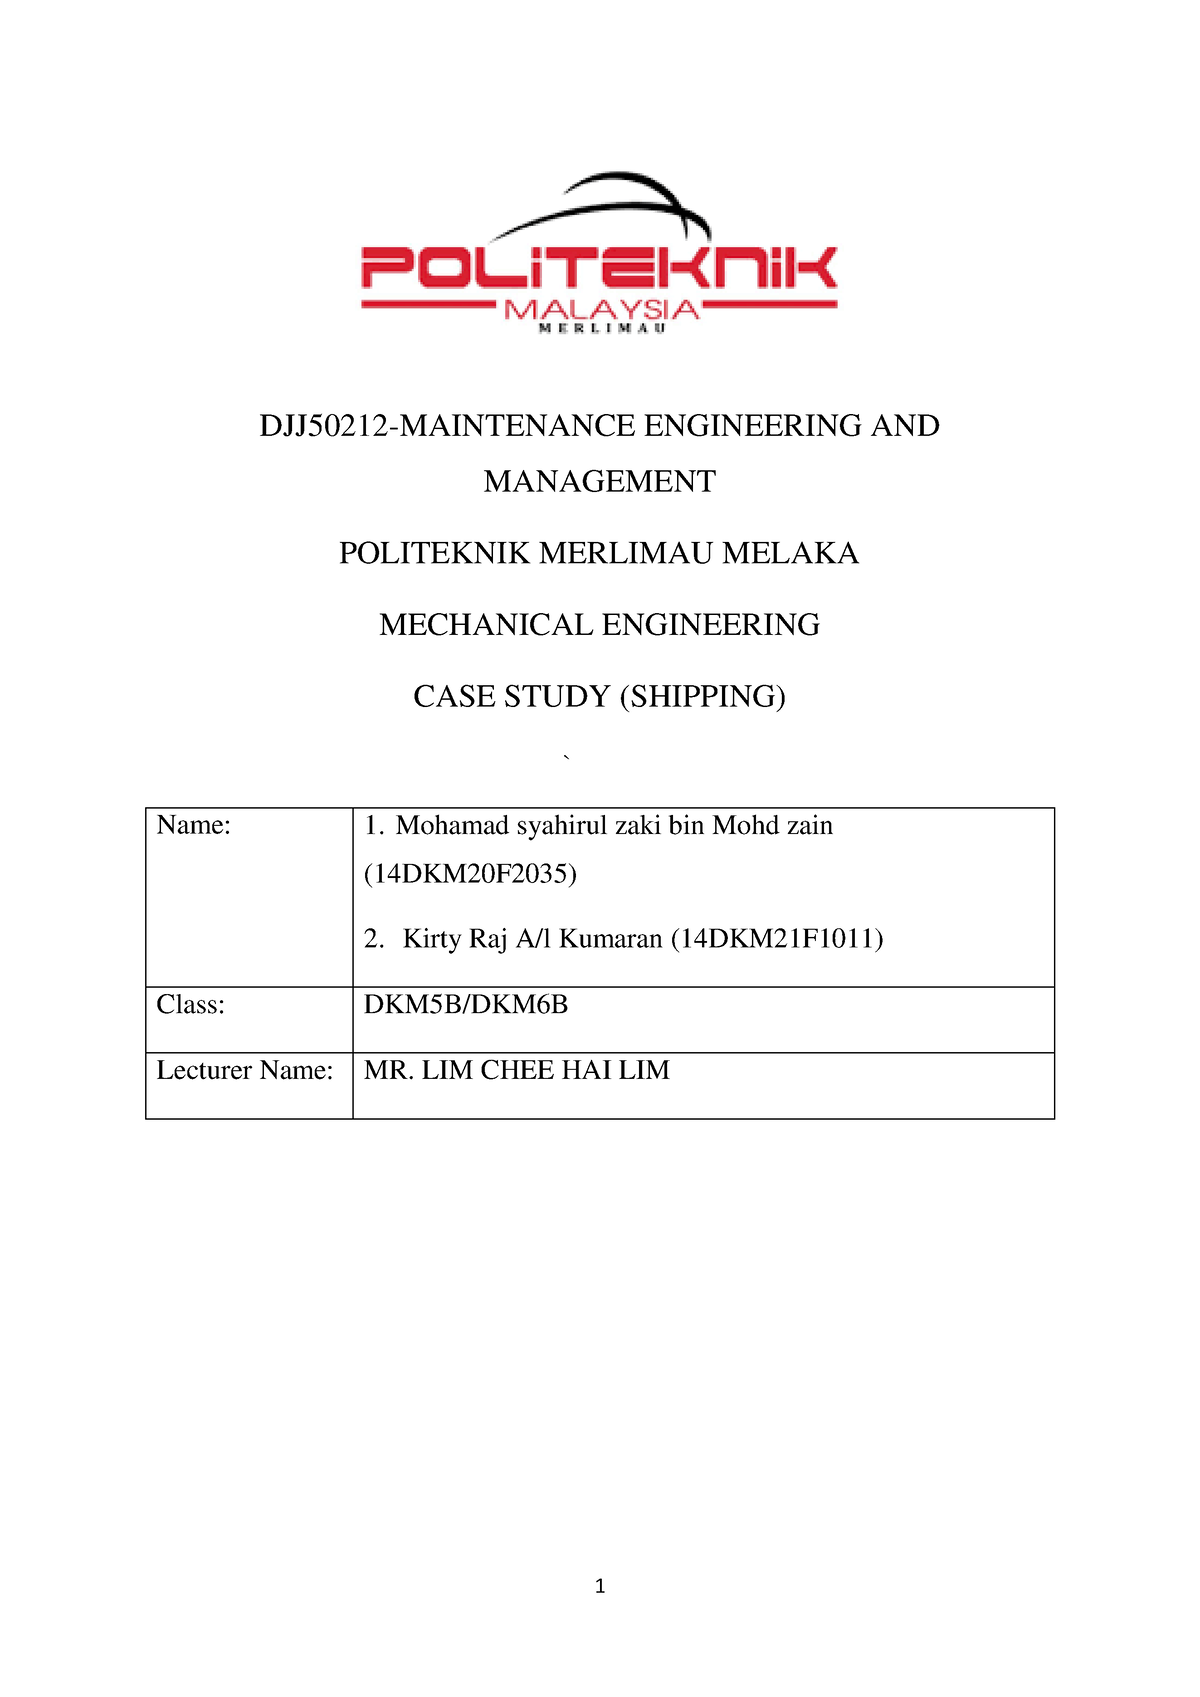 case study maintenance engineering and management